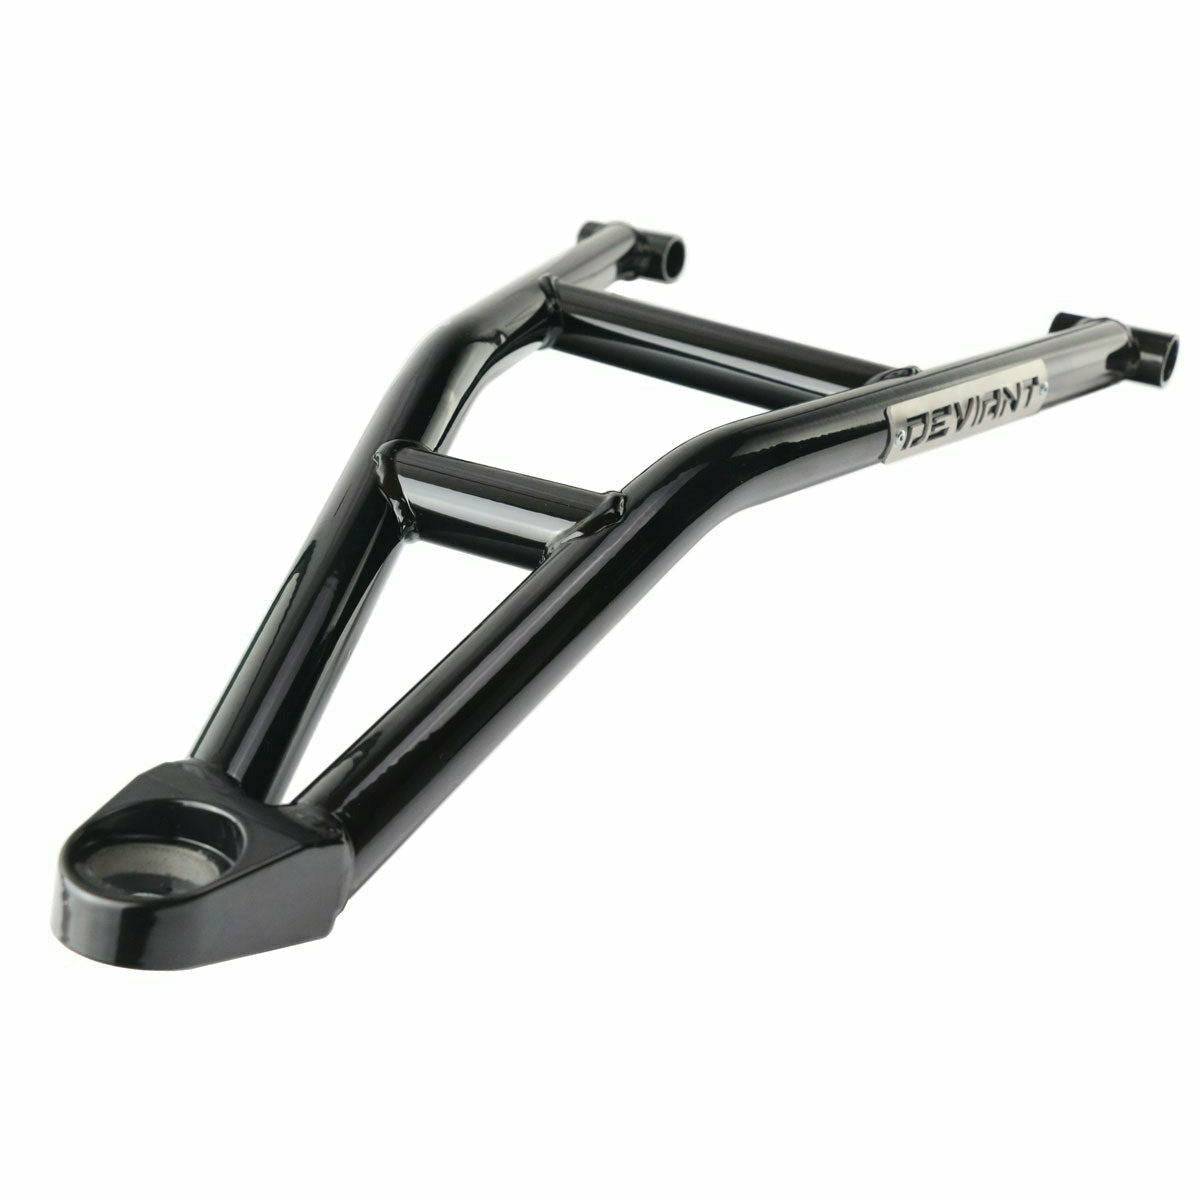 Deviant Polaris RZR XP 1000/Turbo (2014-2019) High Clearance Lower Control Arms